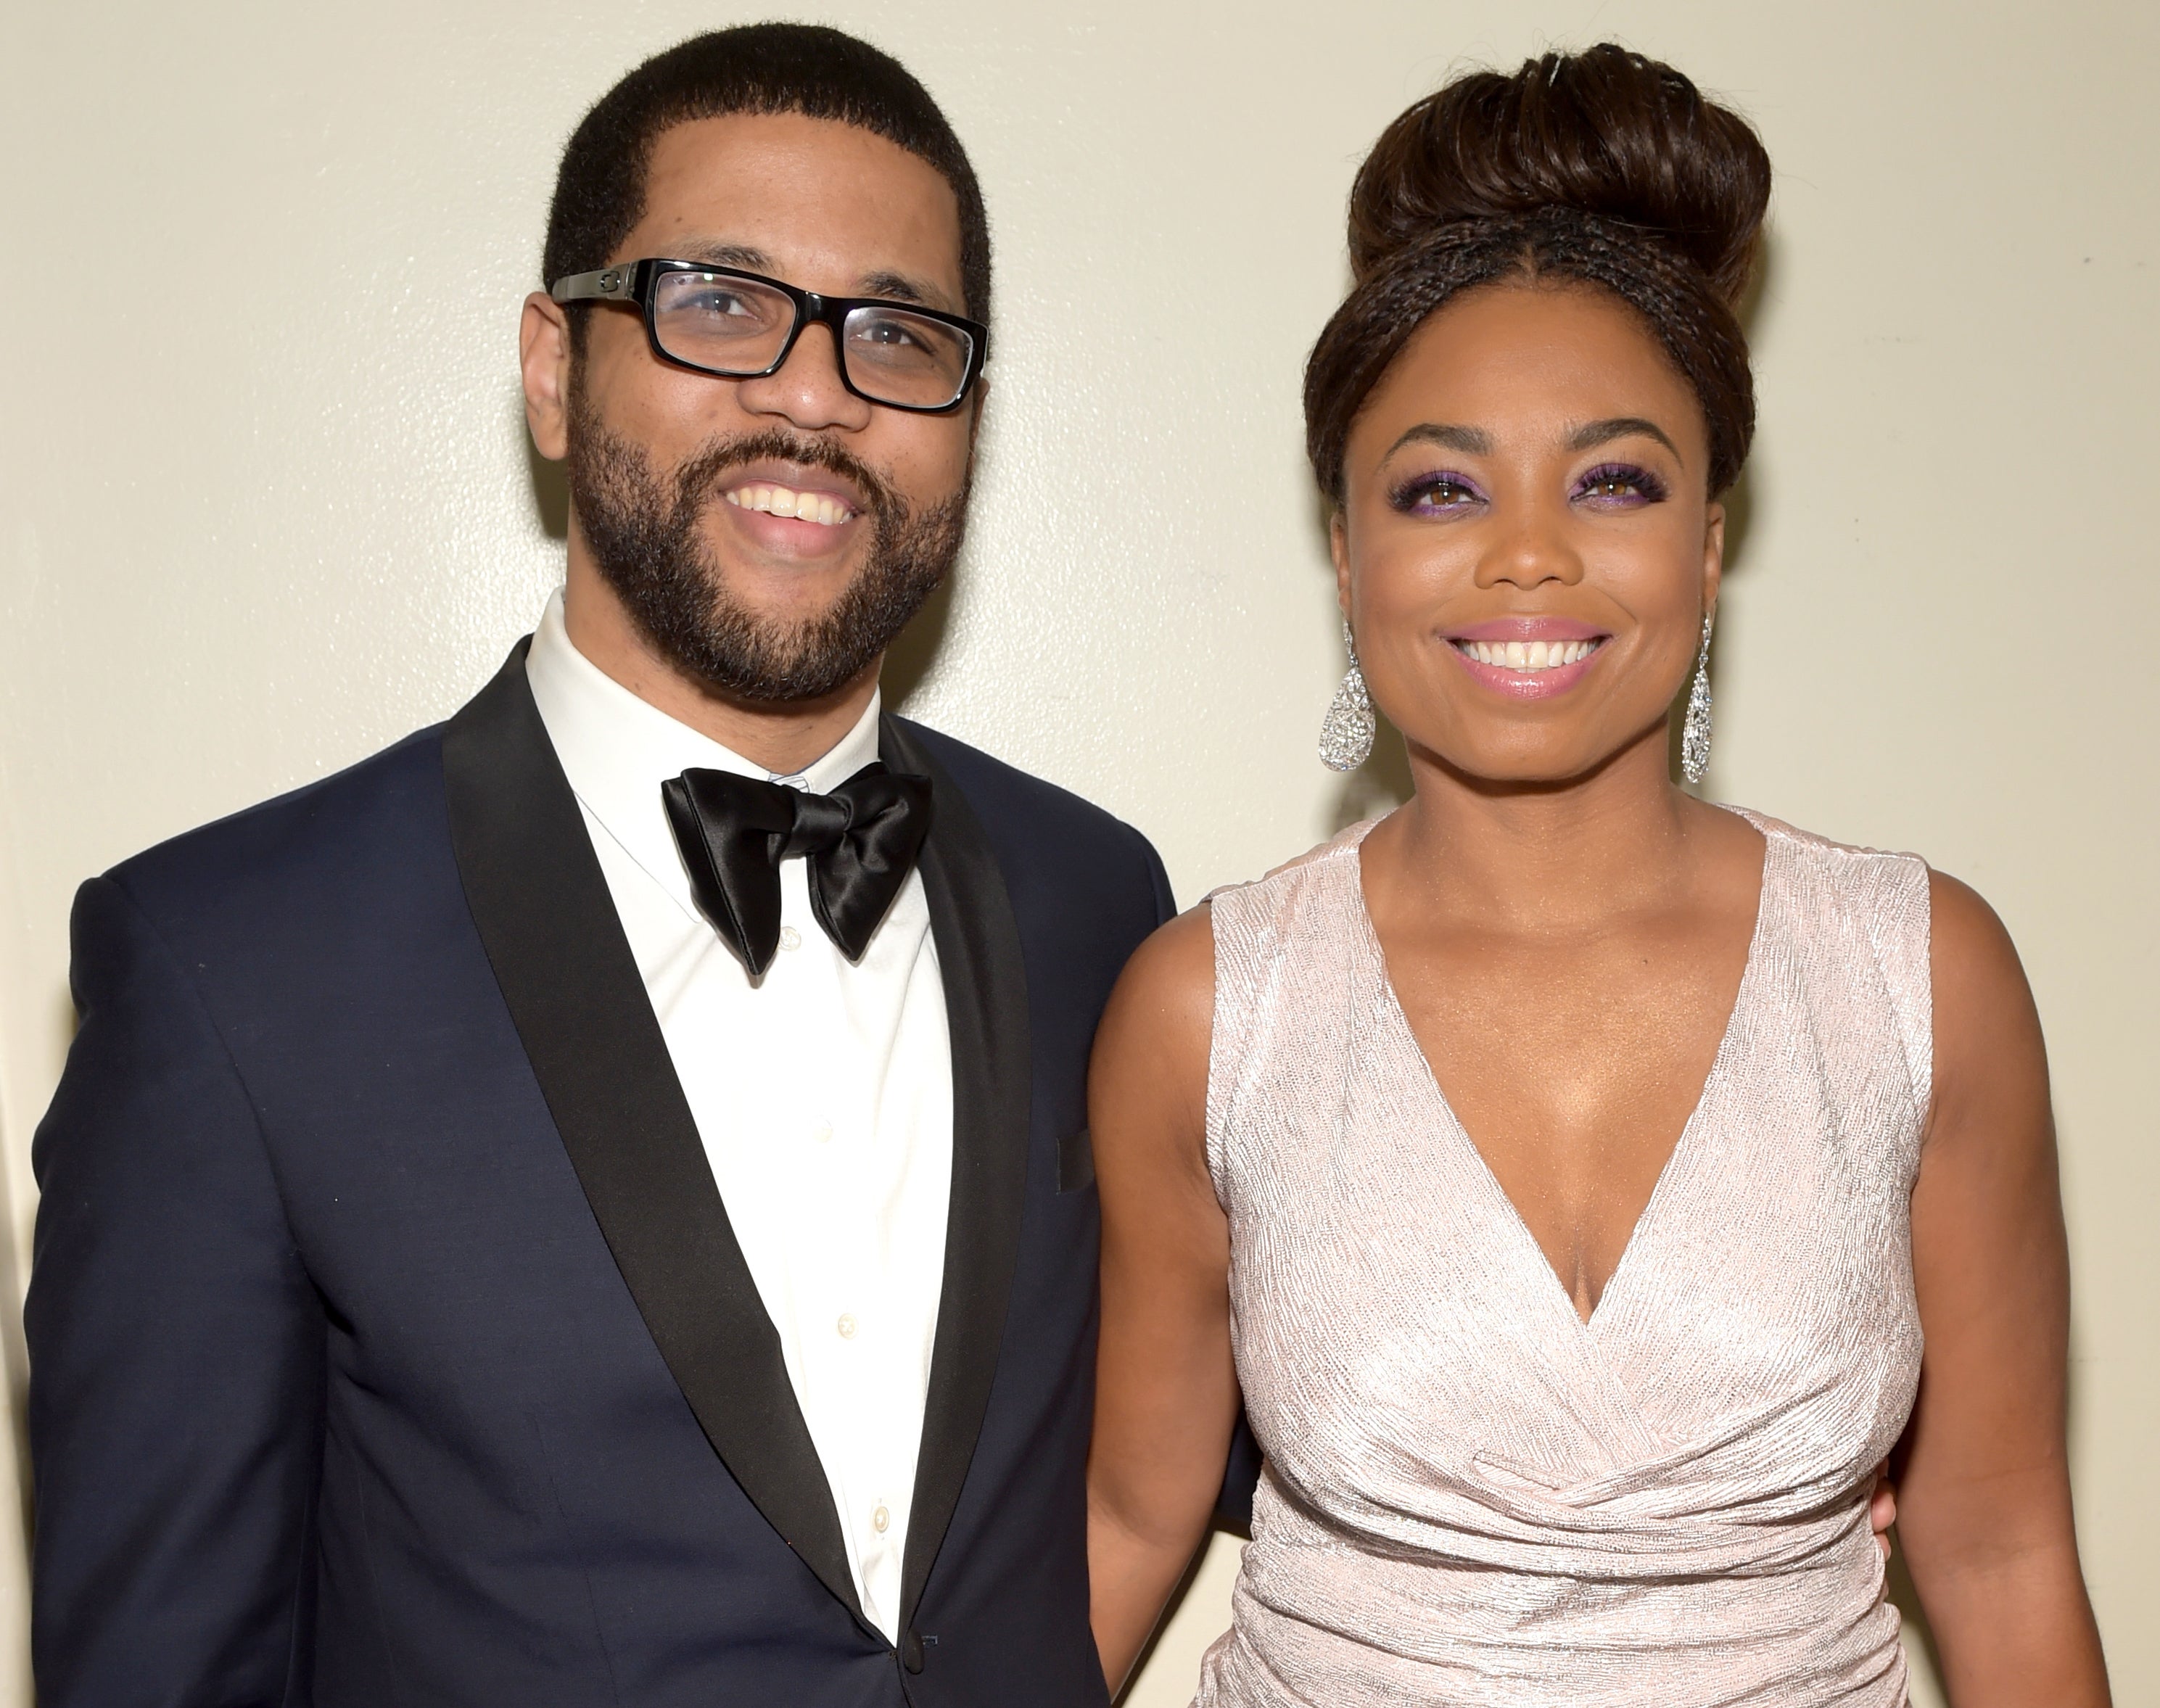 Michael Smith Is Spilling The Tea About How He And Jemele Hill Were Treated By ESPN
